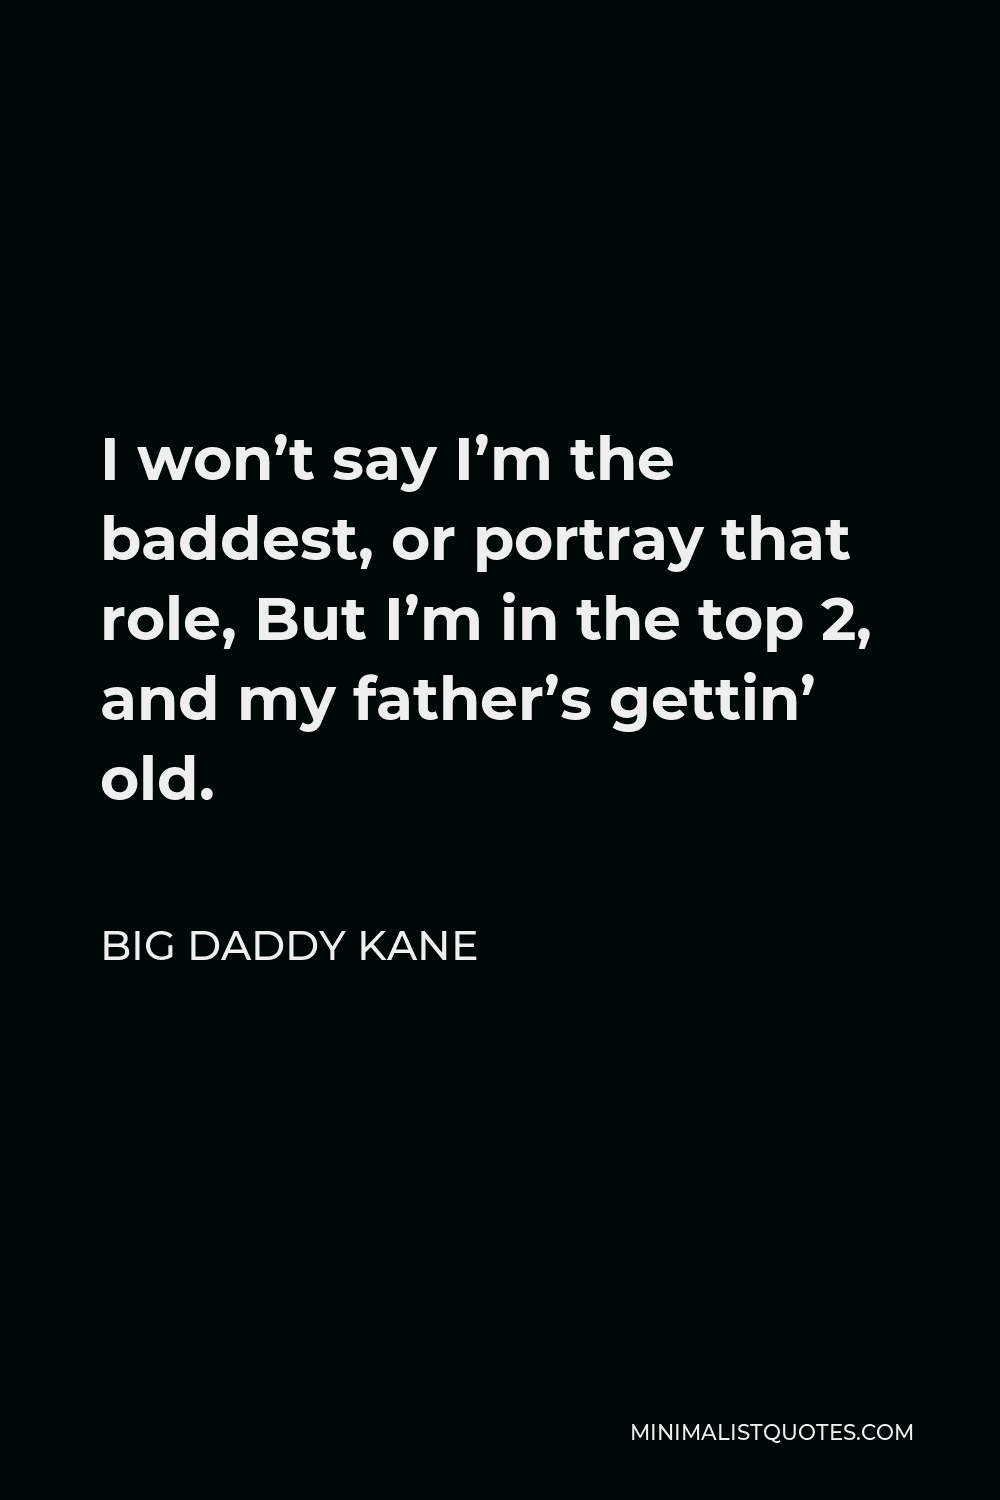 Big Daddy Kane Quote - I won’t say I’m the baddest, or portray that role, But I’m in the top 2, and my father’s gettin’ old.